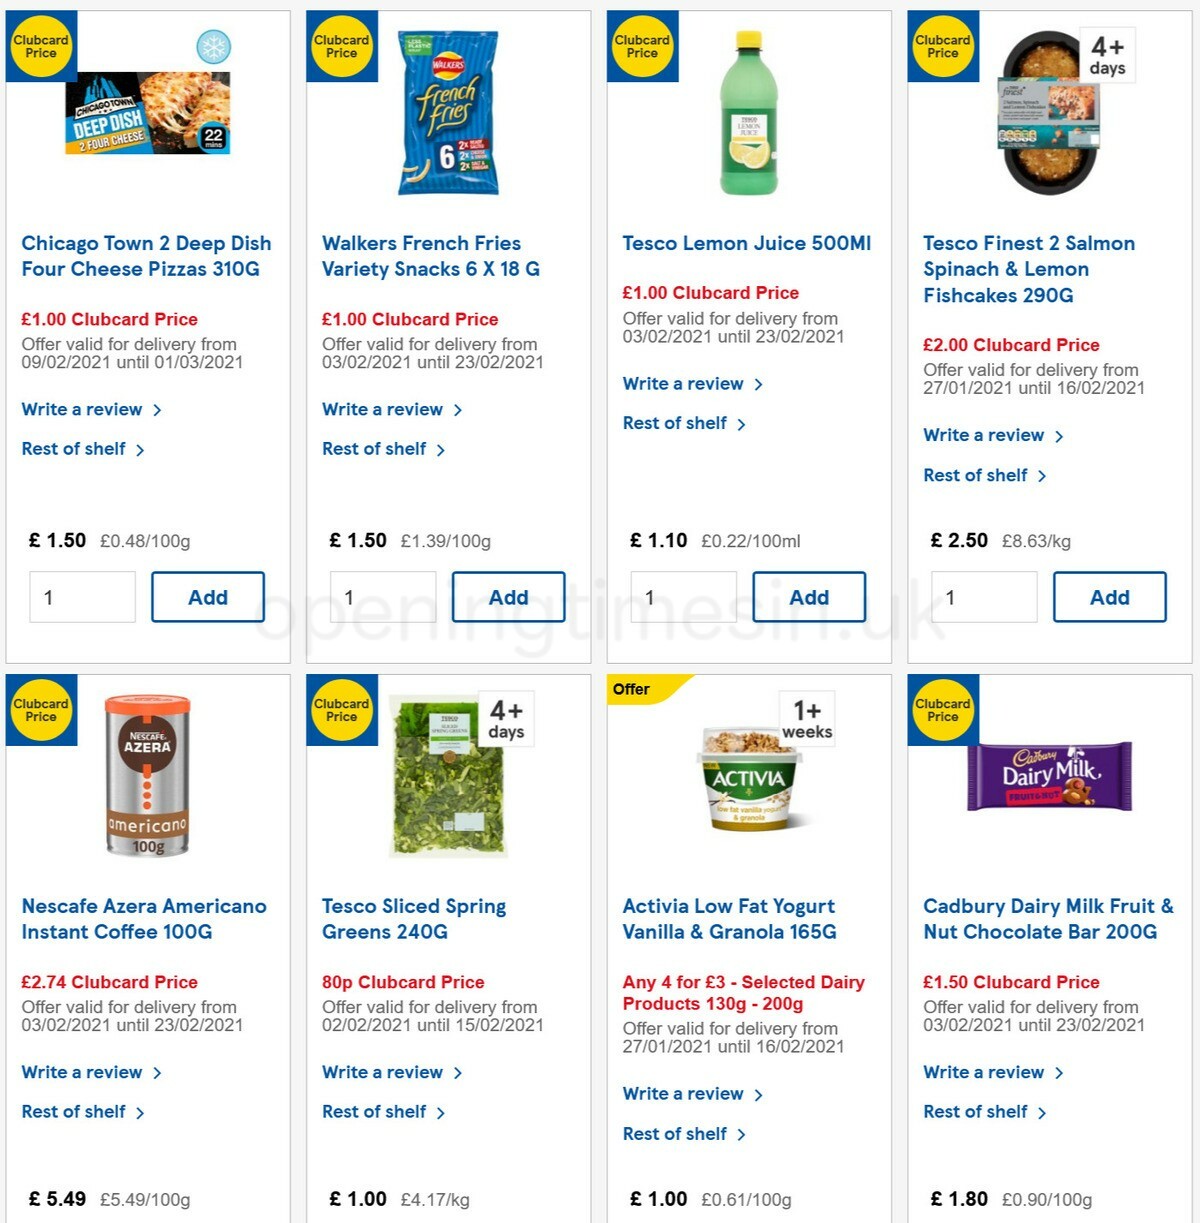 TESCO Offers from 10 February